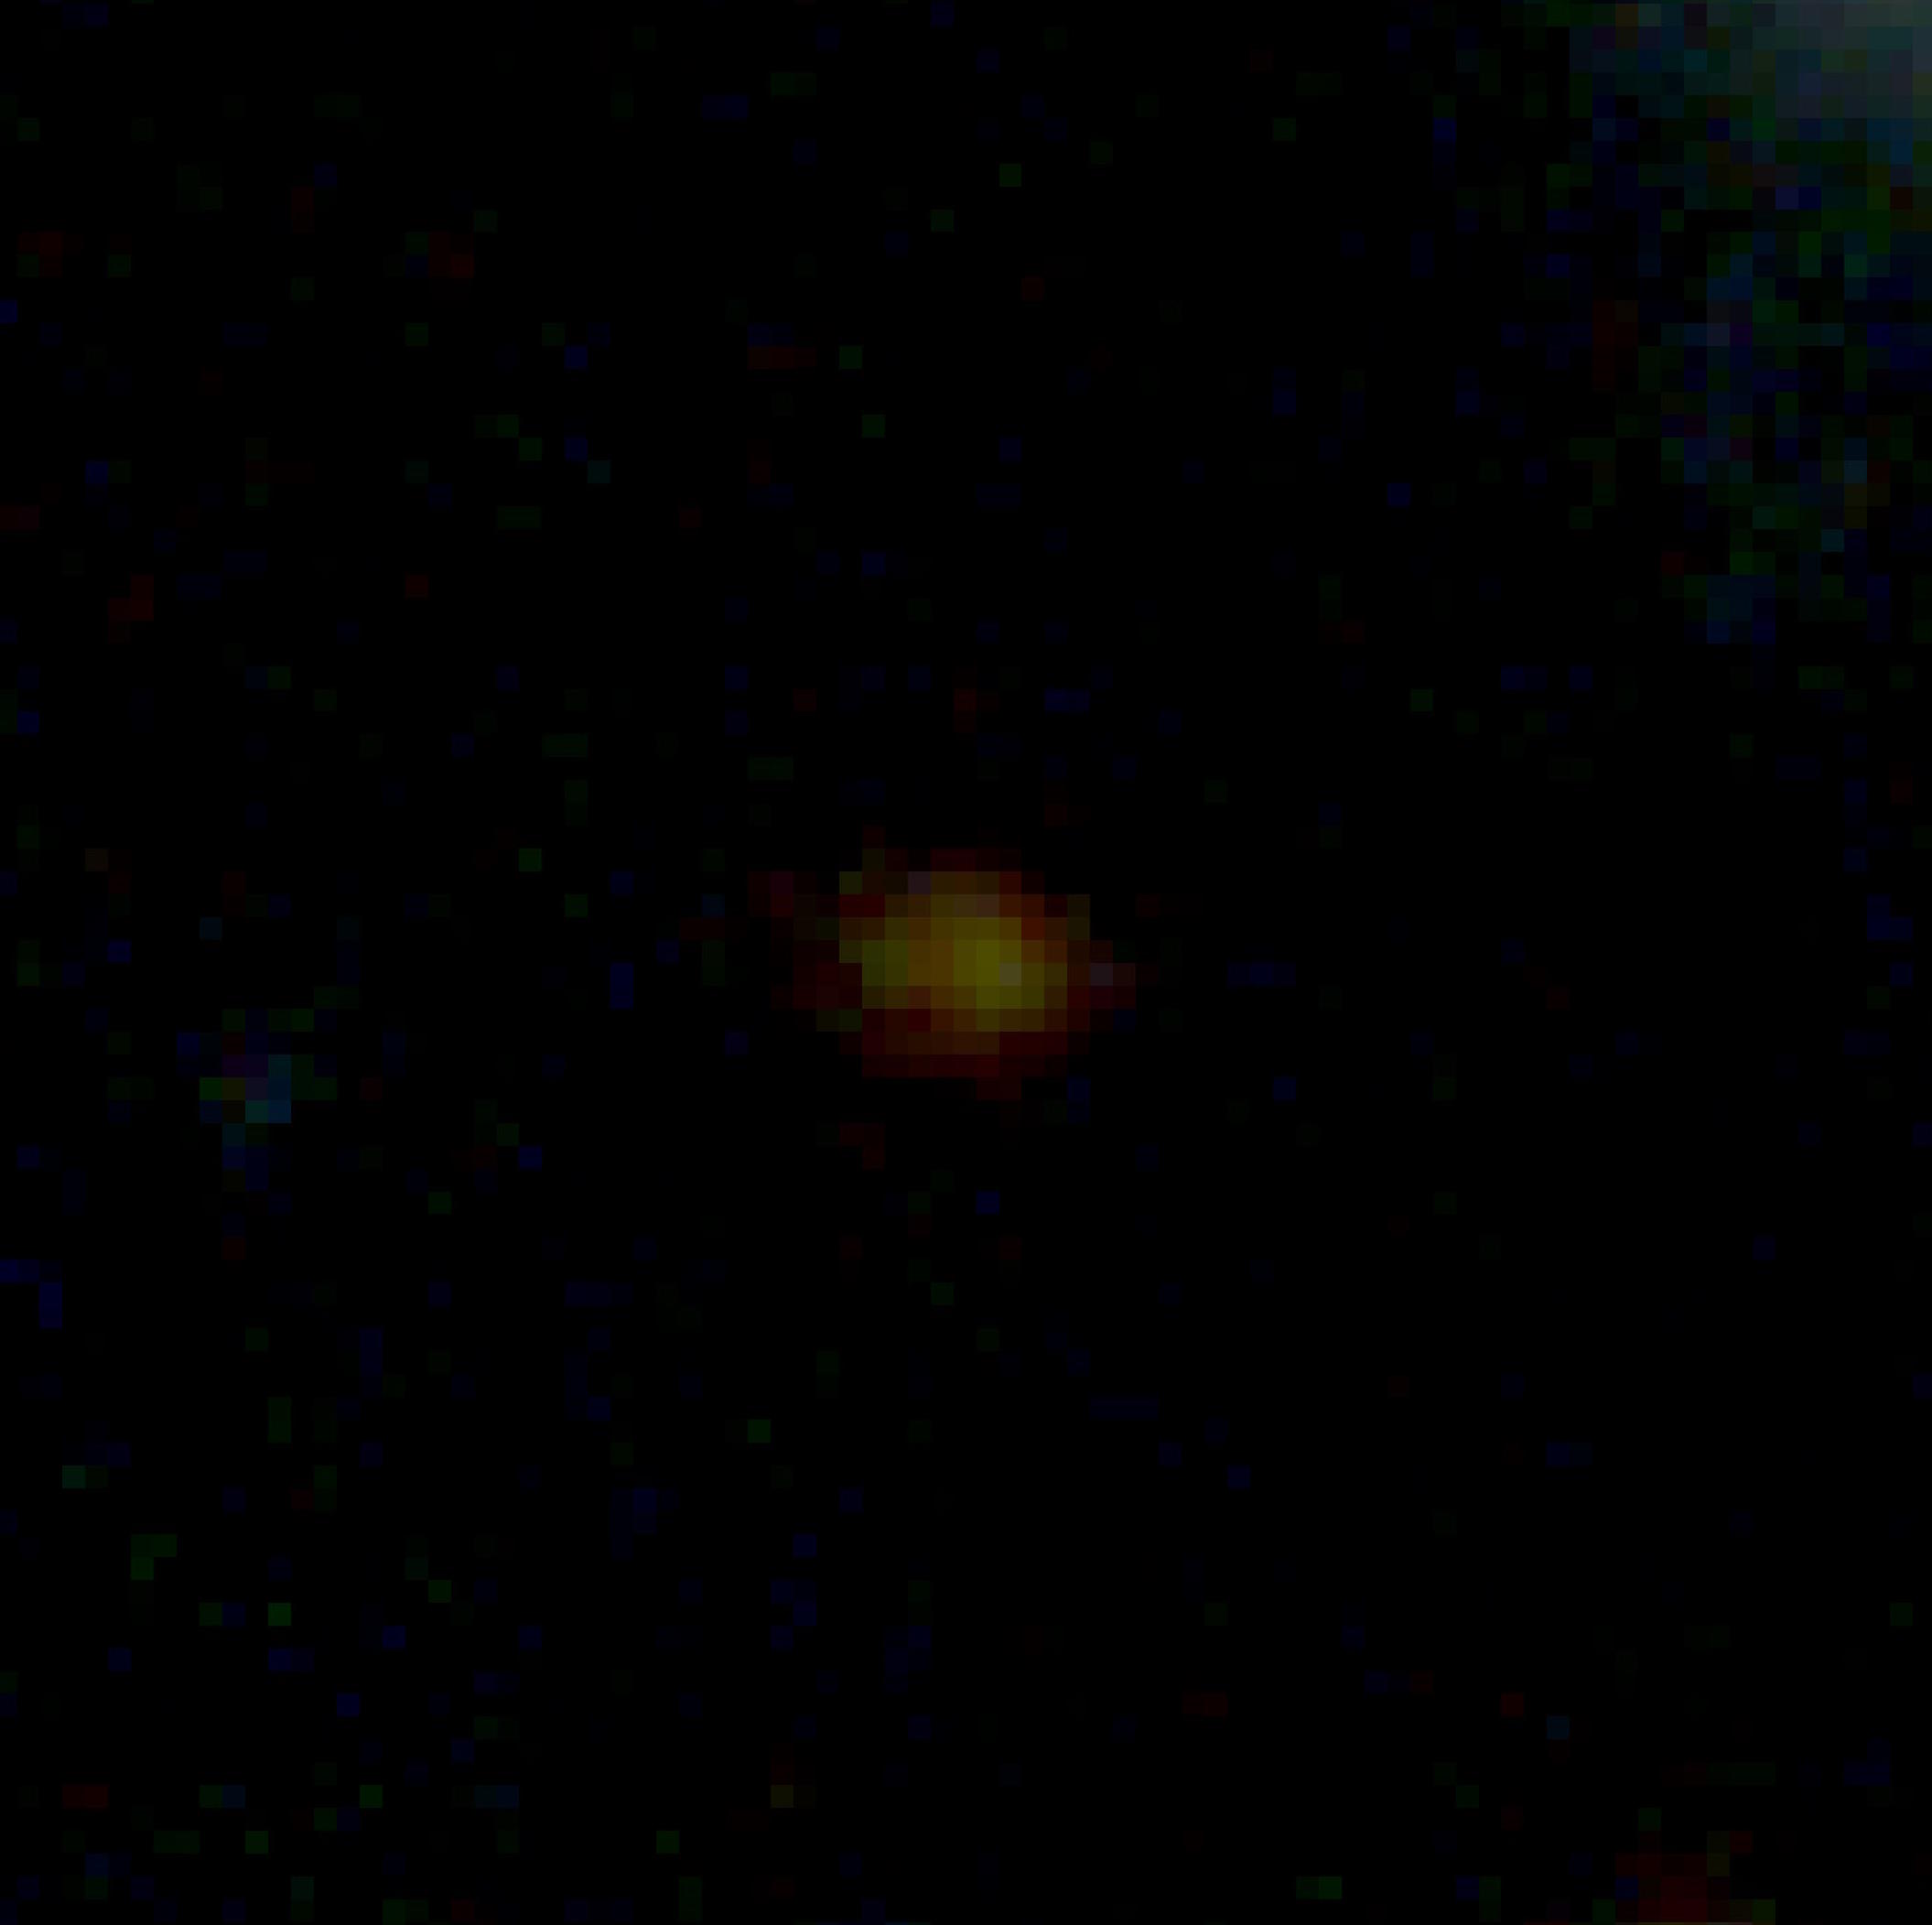 An image of a dead galaxy captured by the JWST in the night sky.